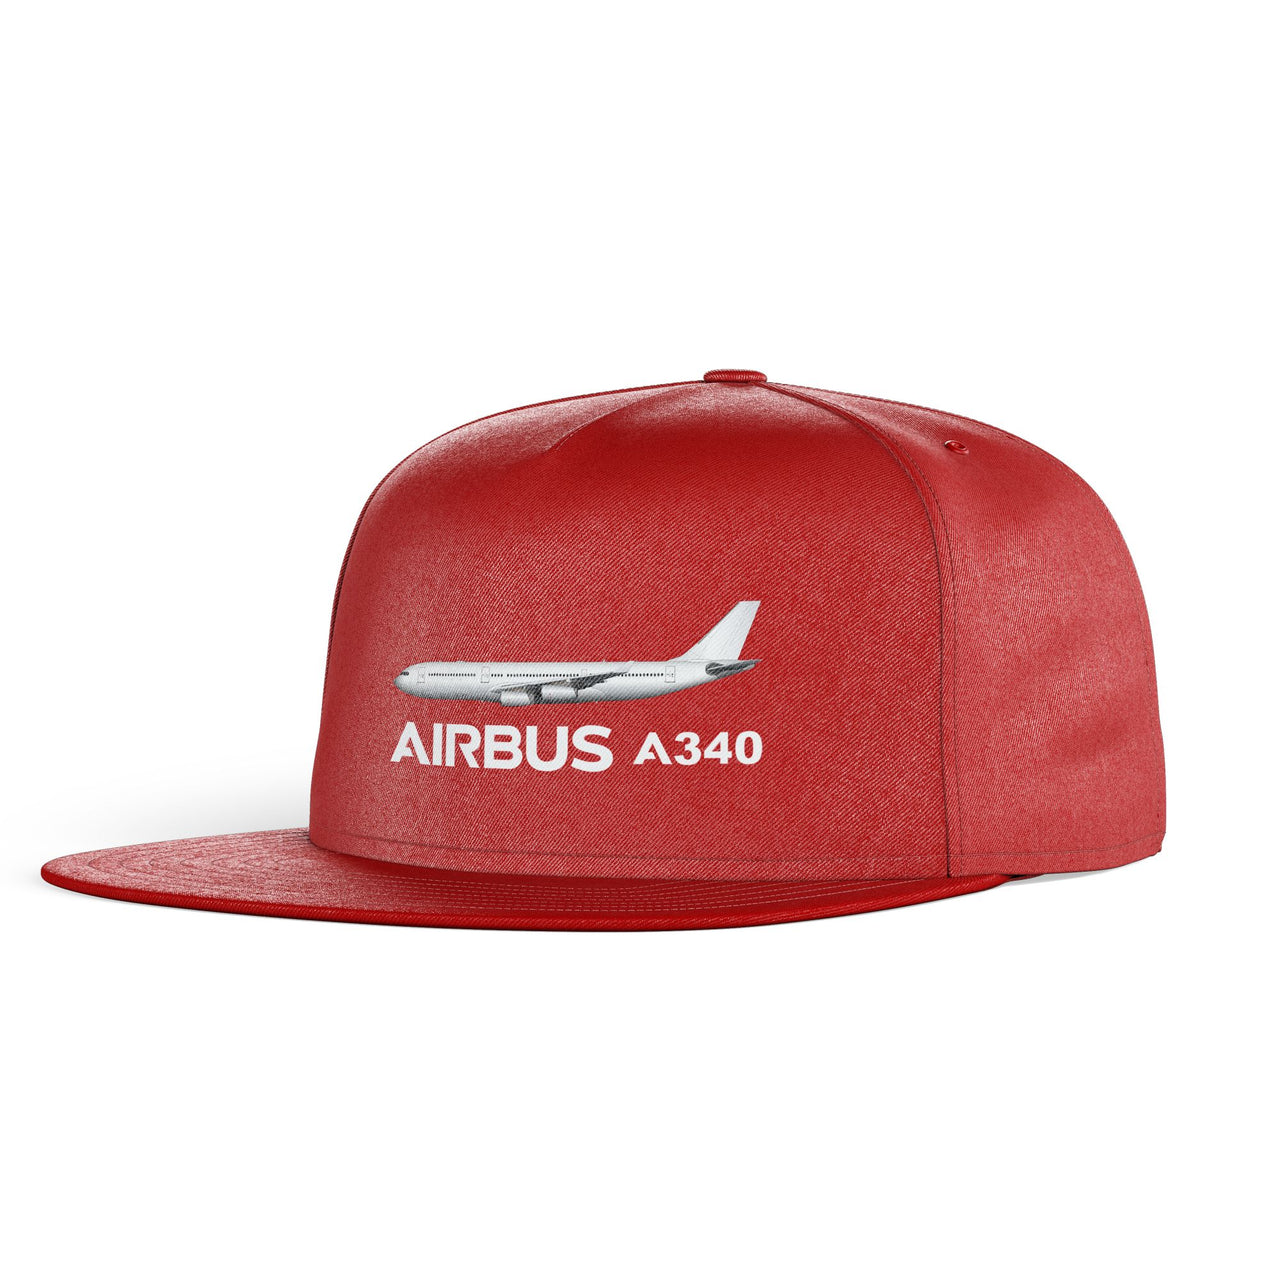 The Airbus A340 Designed Snapback Caps & Hats